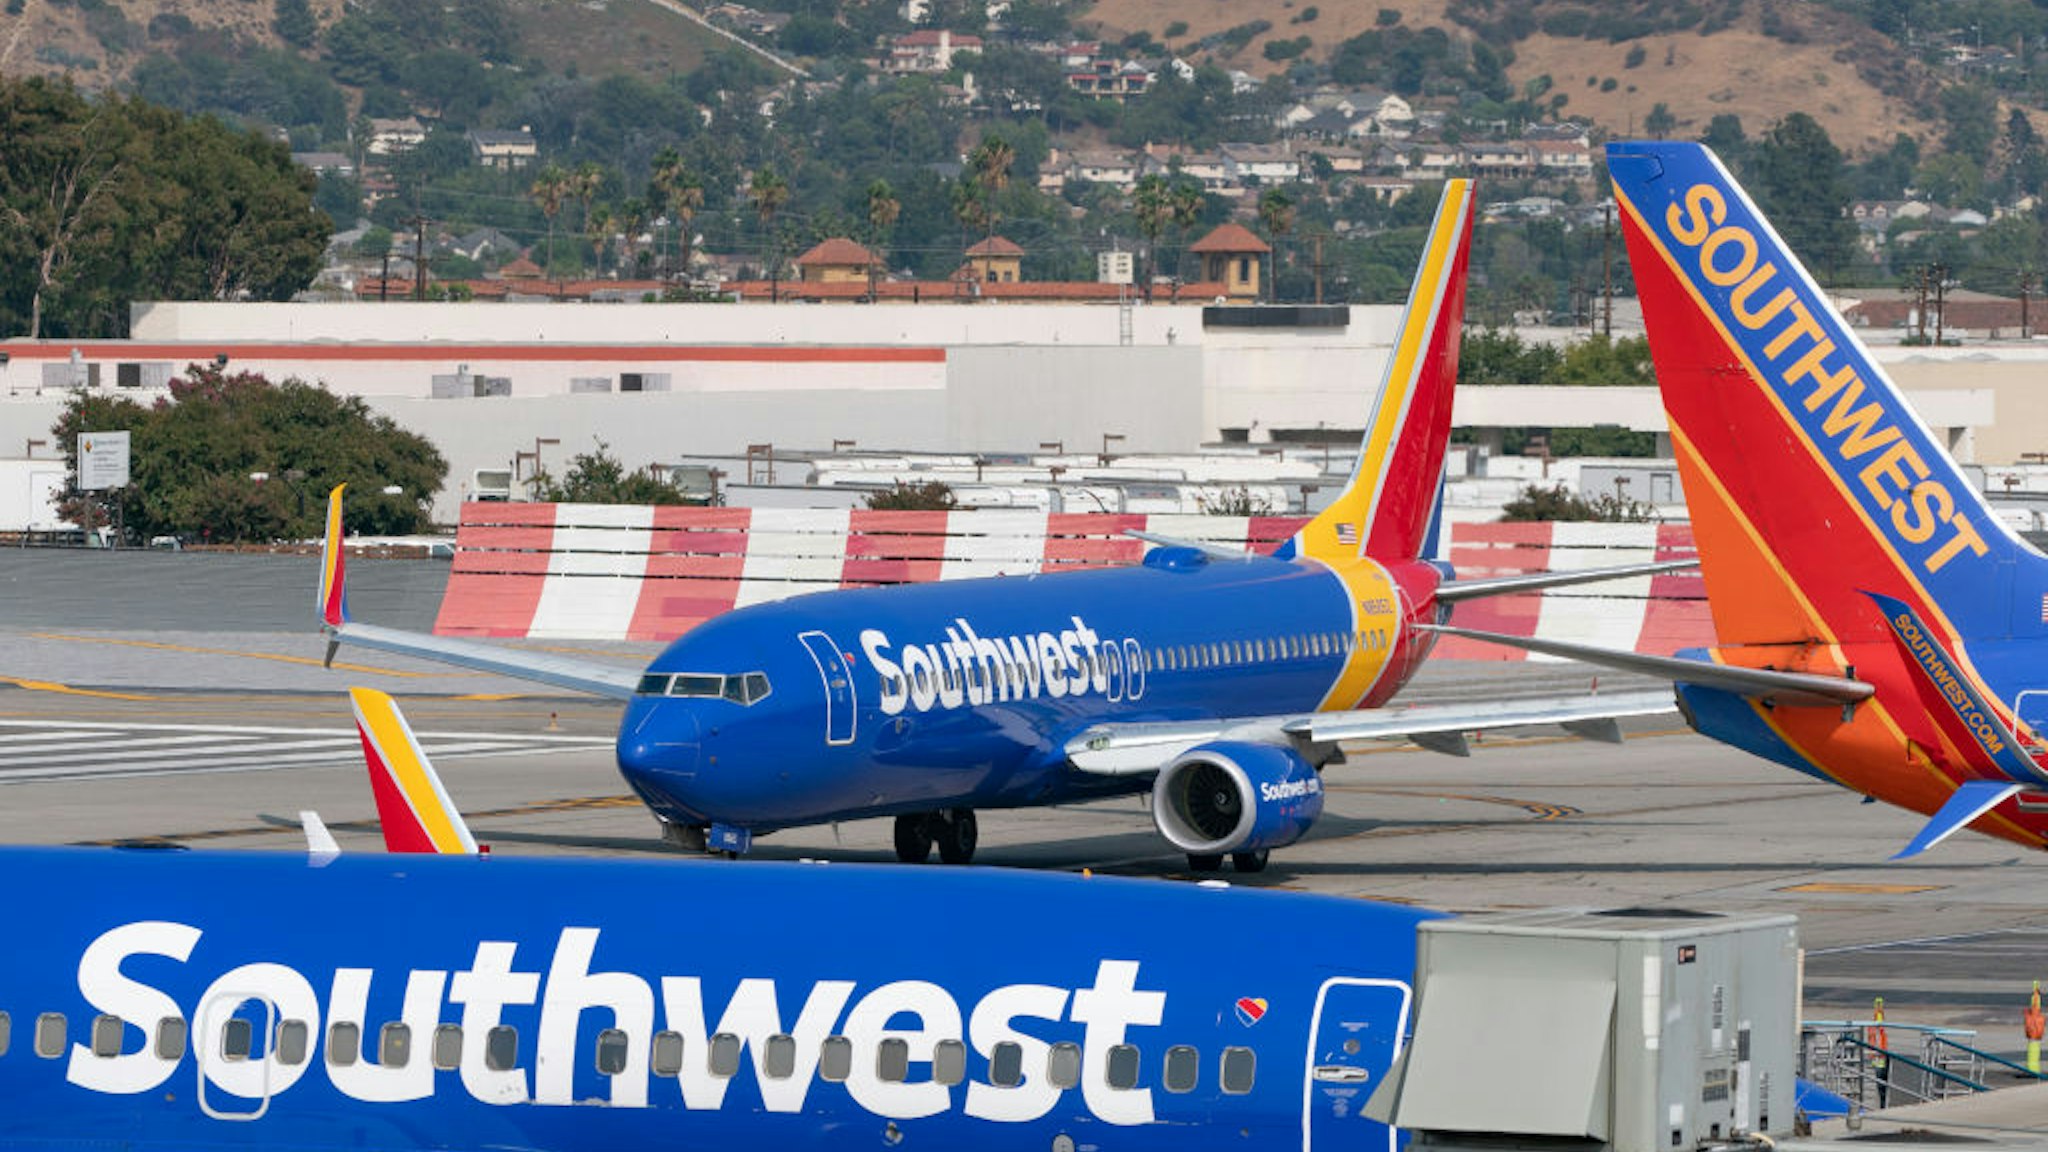 Southwest Airlines Boeing 737-800 takes off from Hollywood Burbank Airport on September 16, 2020 in Burbank, California.